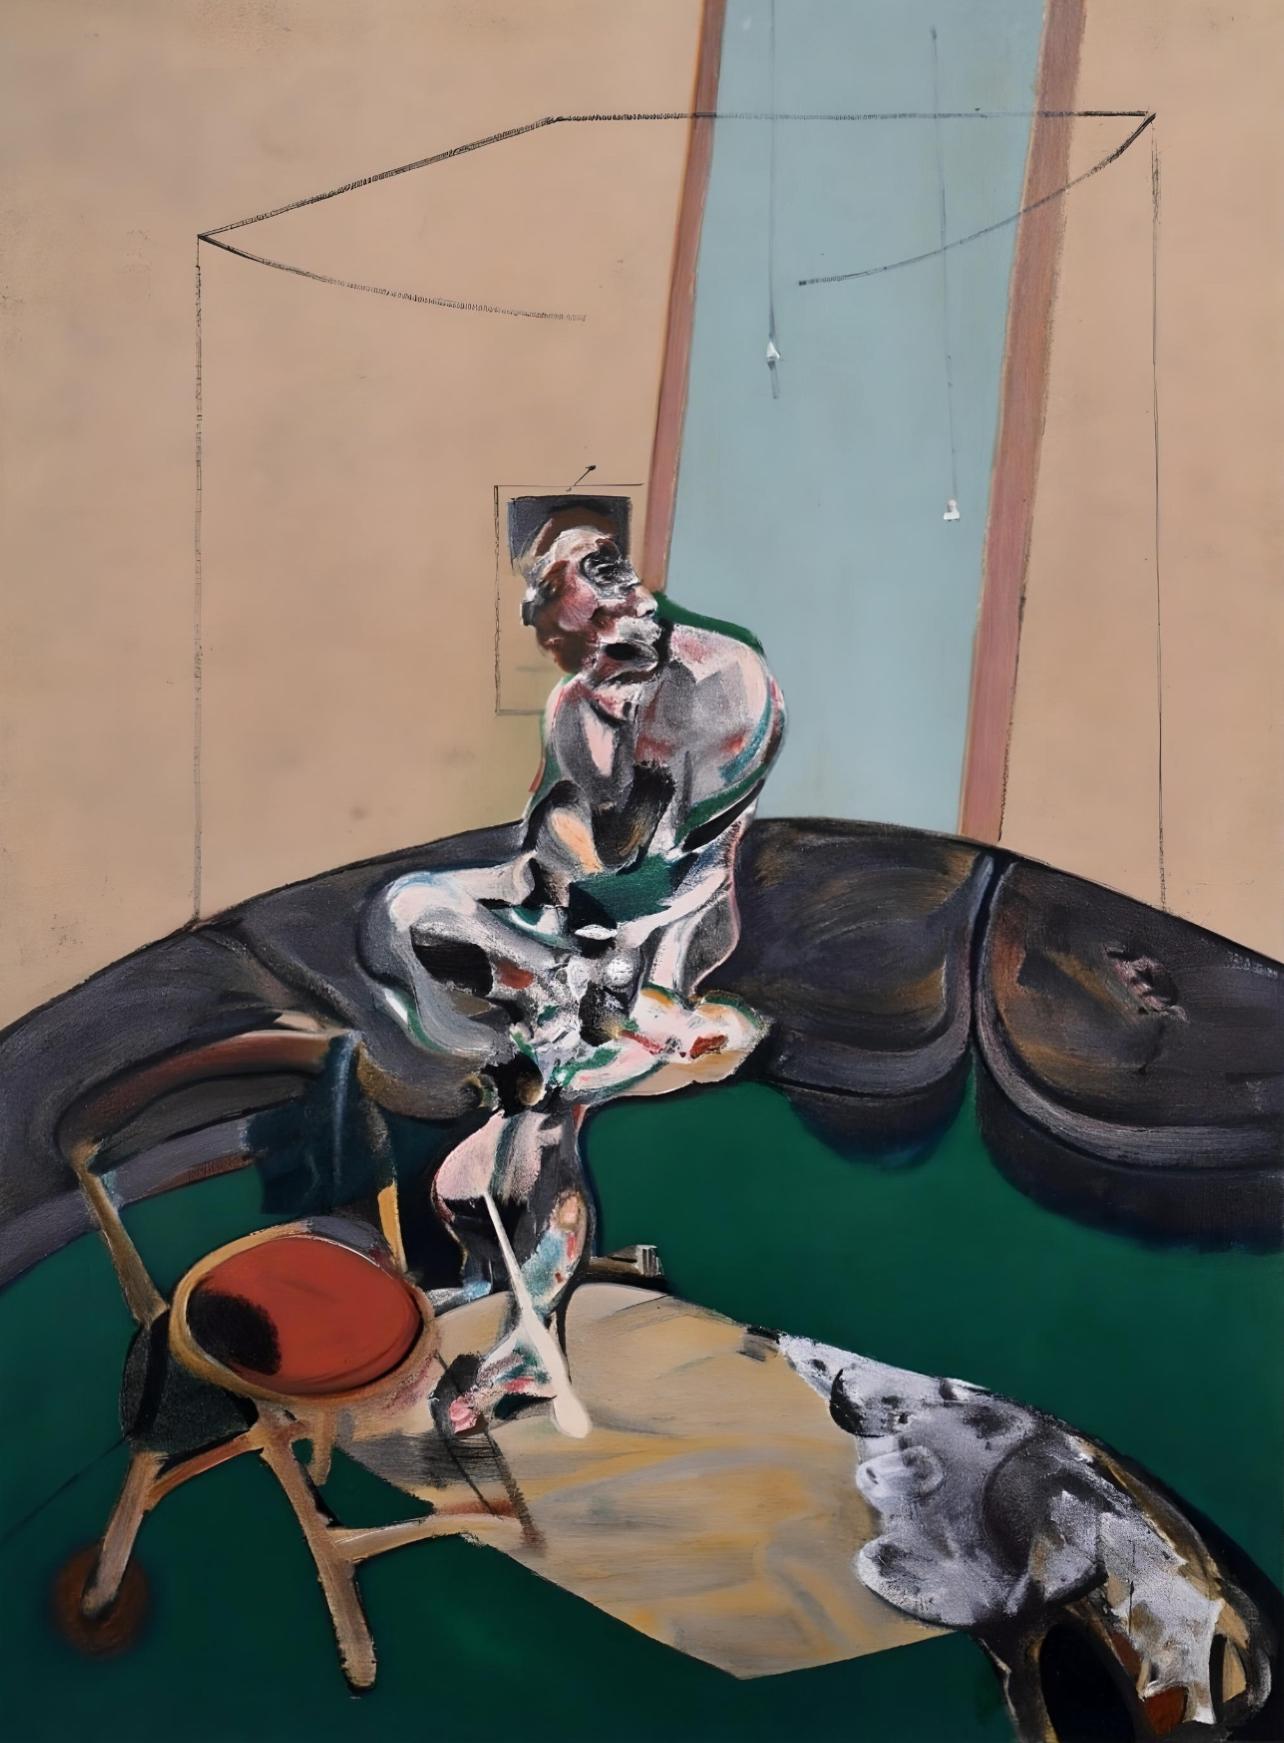 Francis Bacon Abstract Print - Bacon, Portrait of George Dyer Staring at Blind Cord, Derrière le miroir (after)